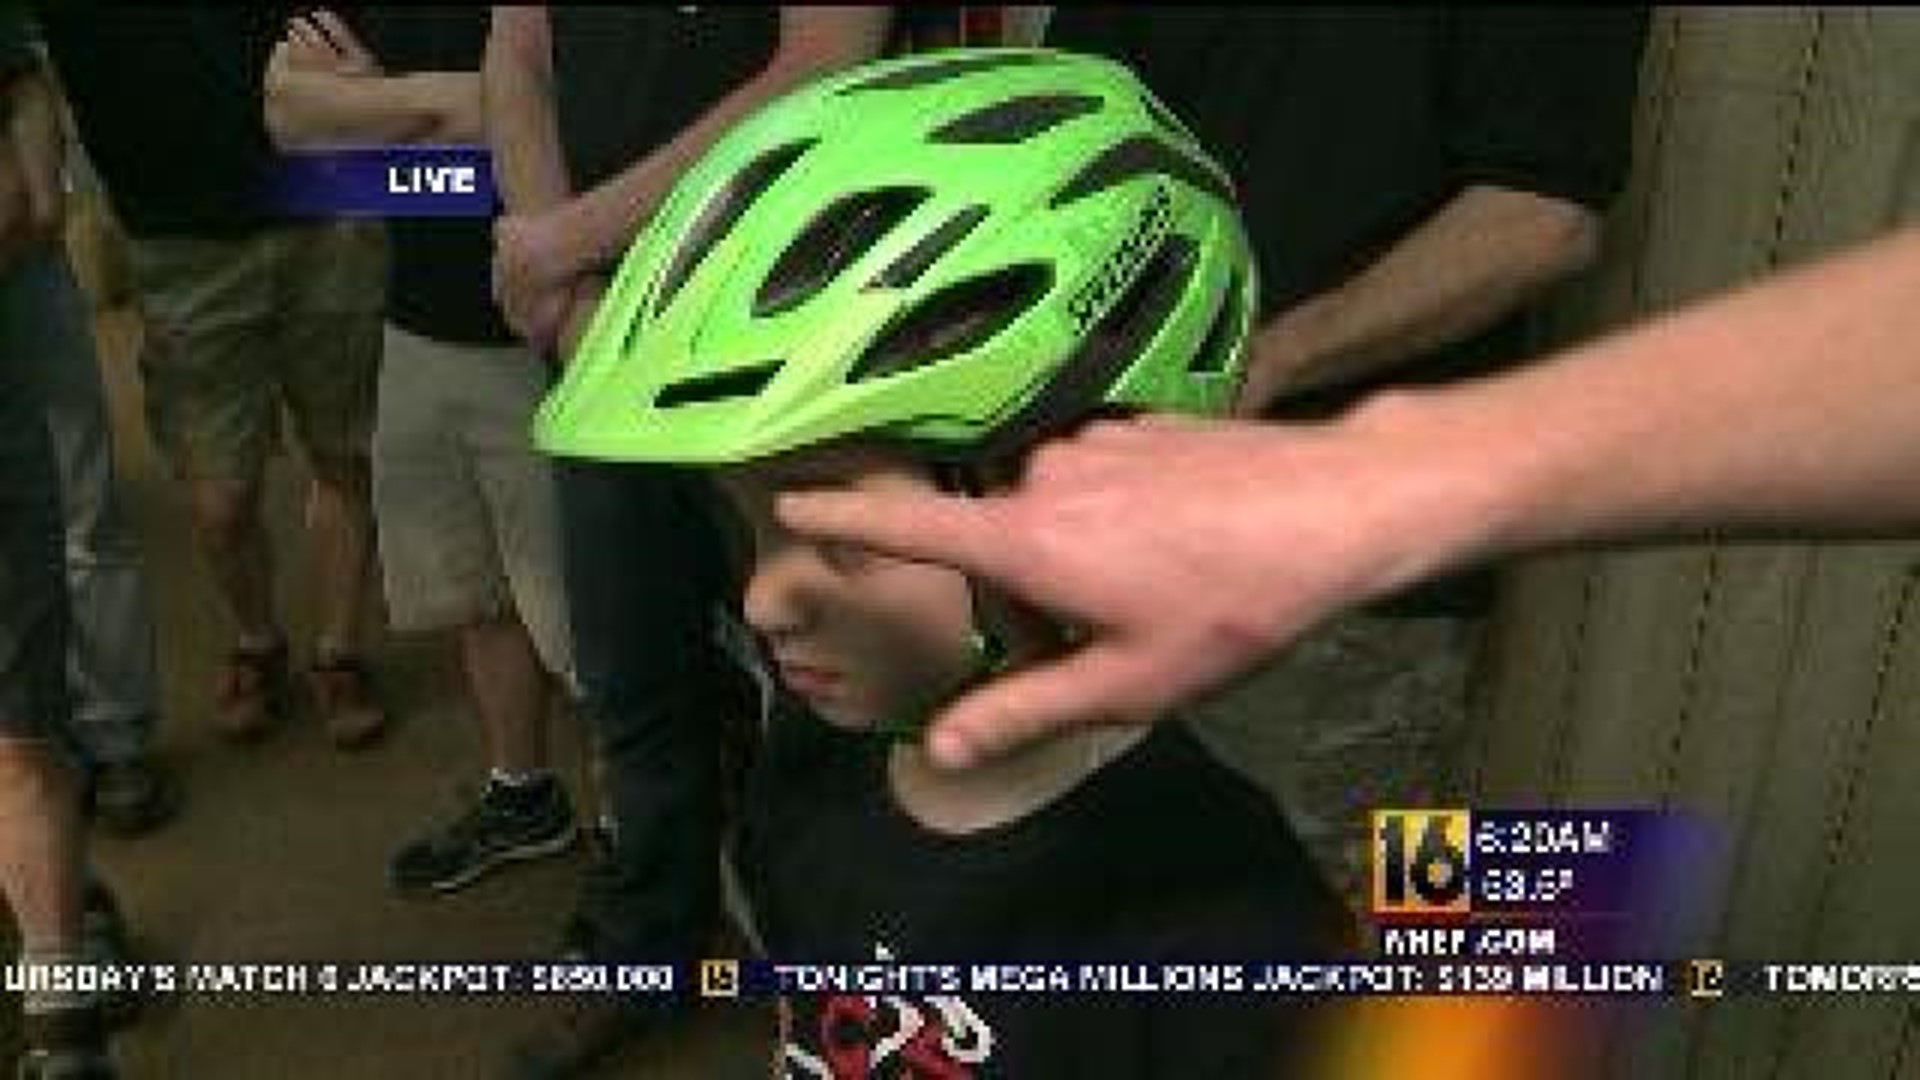 National Bike Safety Month: Sharing the Road